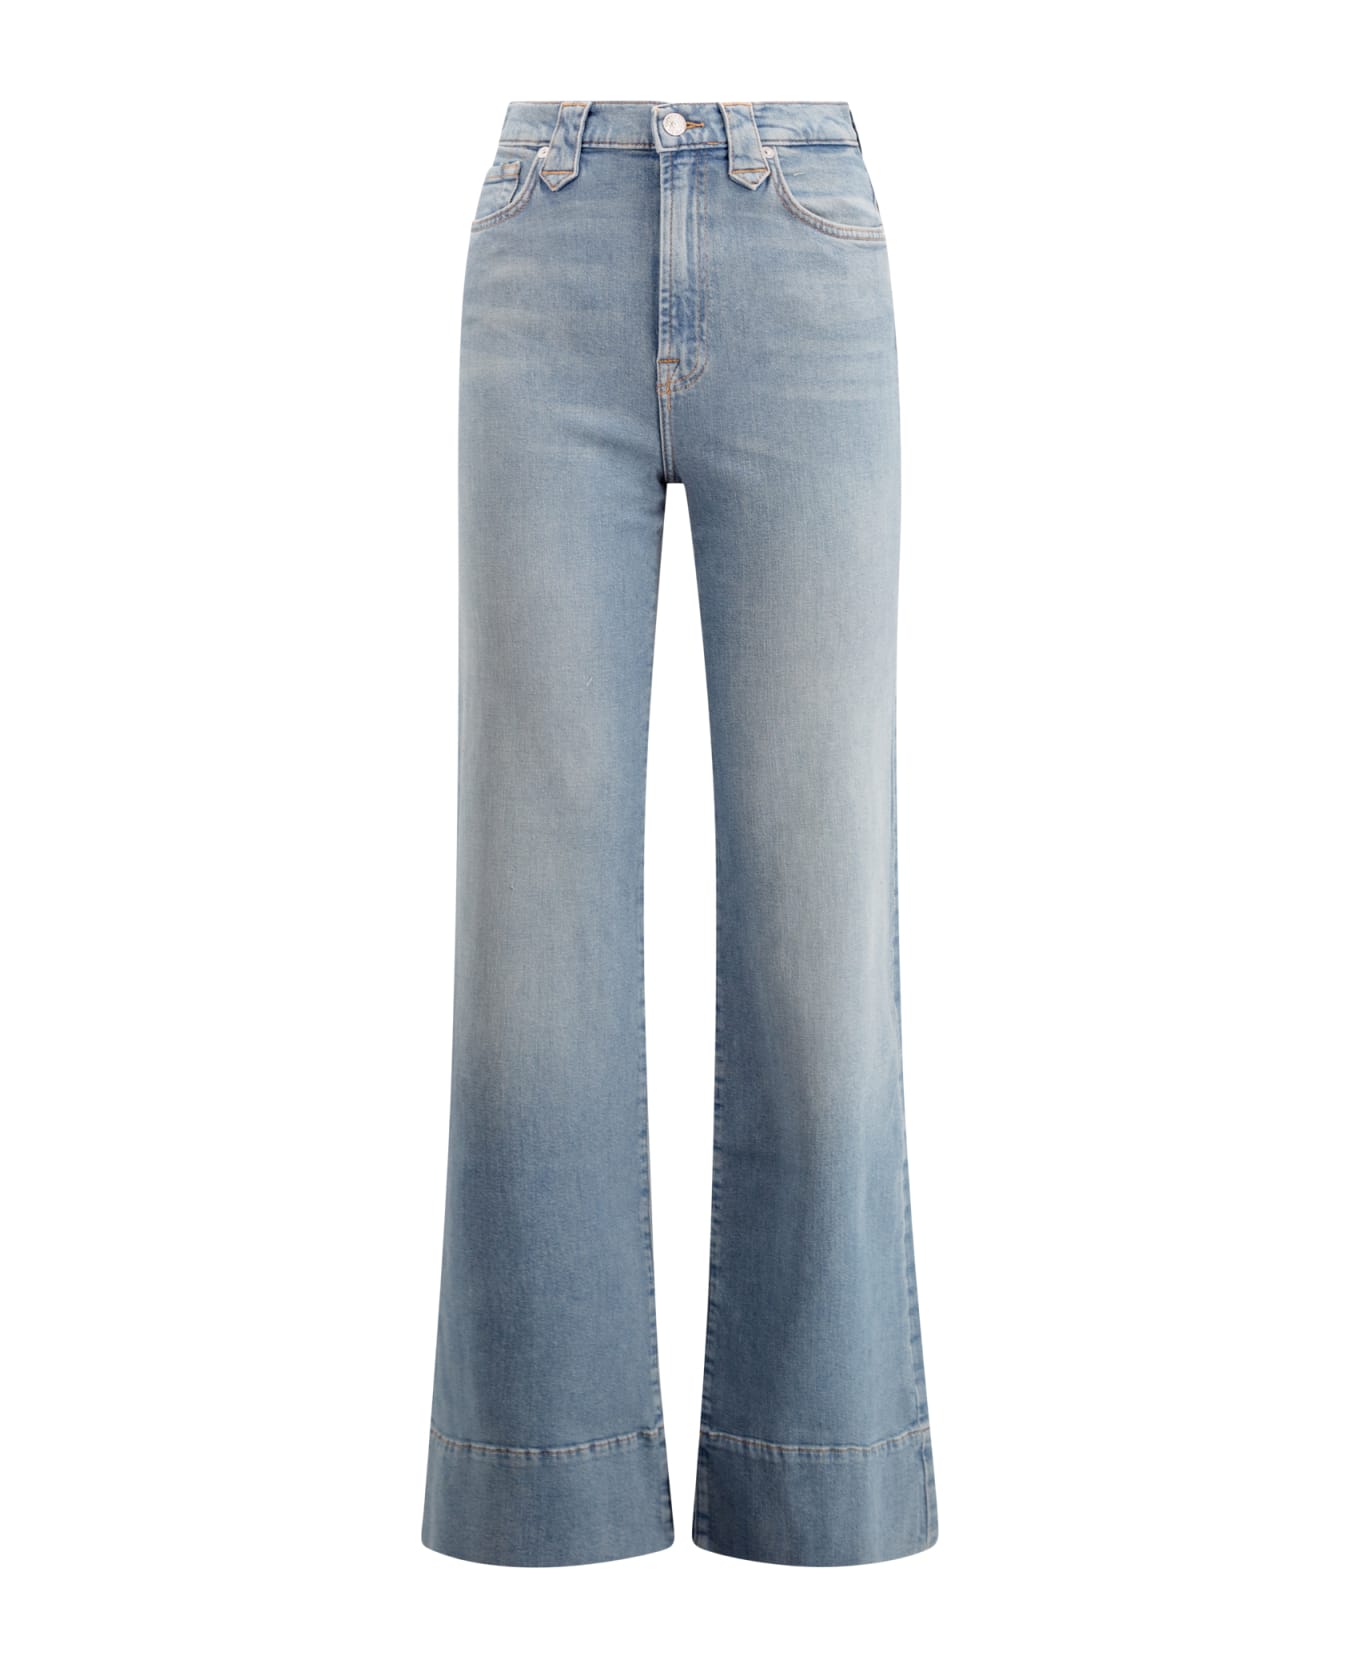 7 For All Mankind High-waisted Flared Jeans - Denim ボトムス